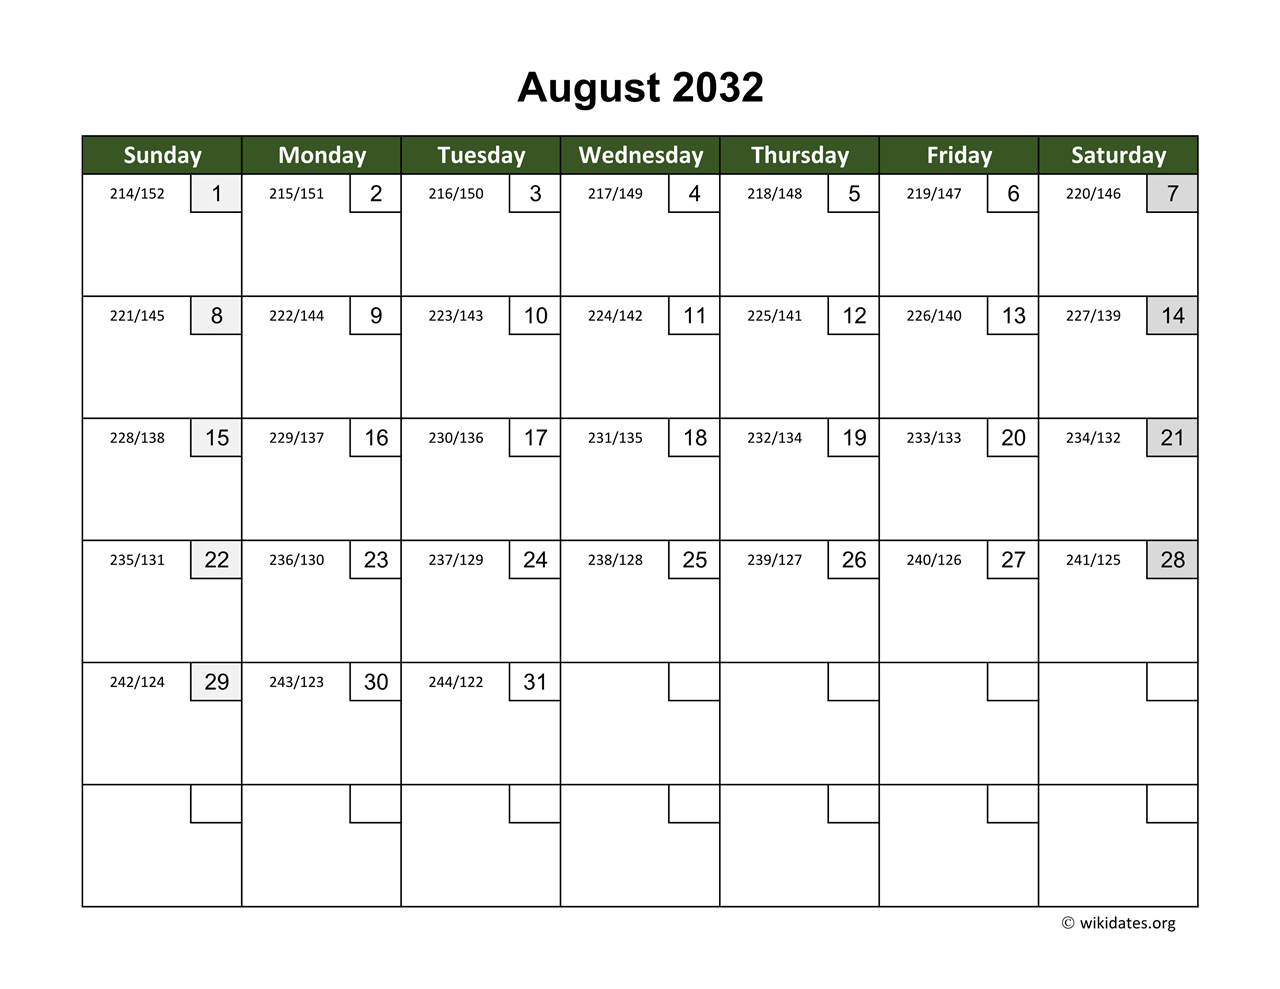 August 2032 Calendar with Day Numbers WikiDates org